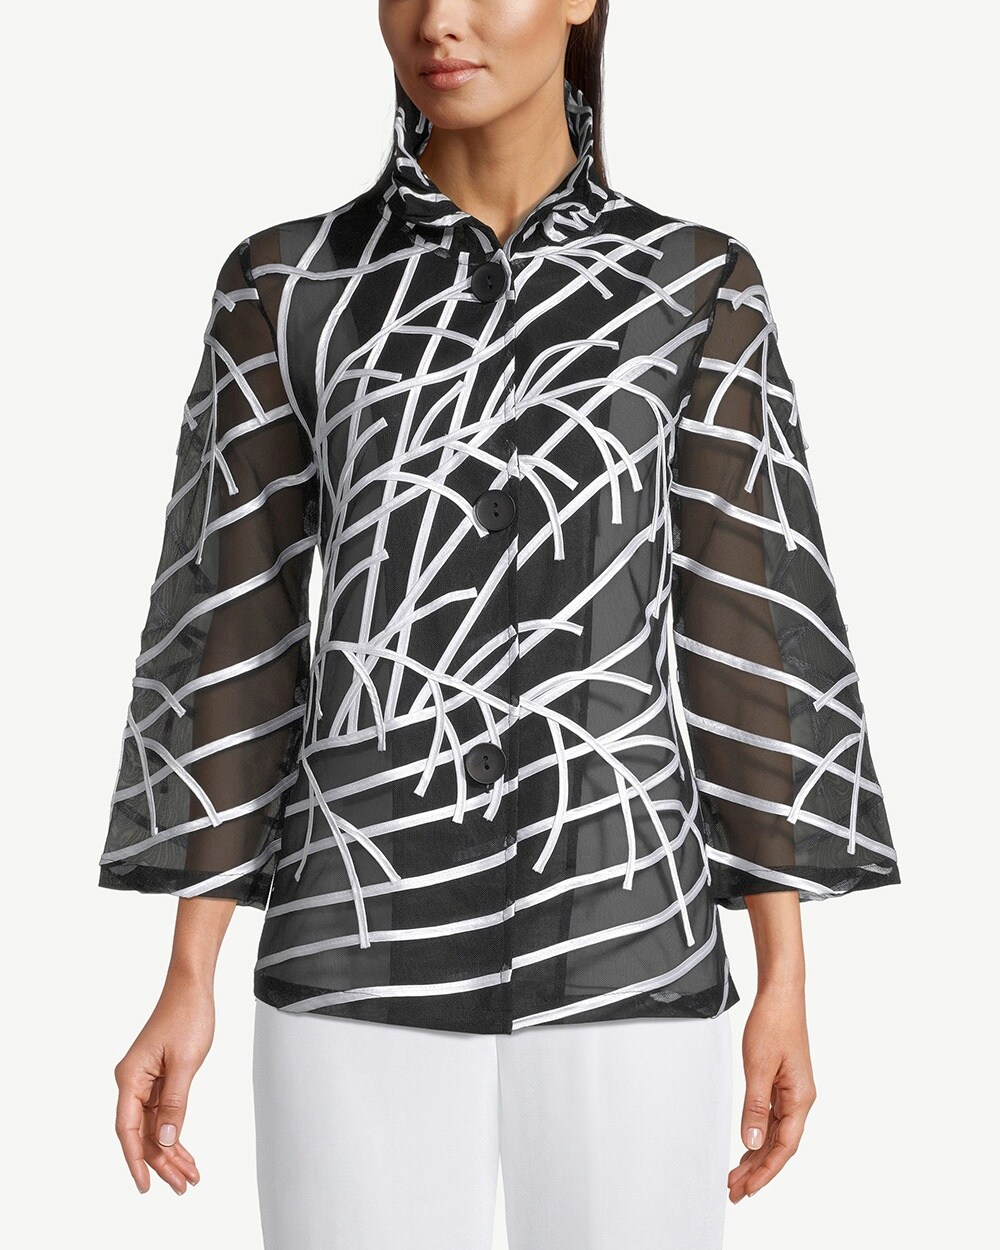 Travelers Collection Printed Strip Jacket